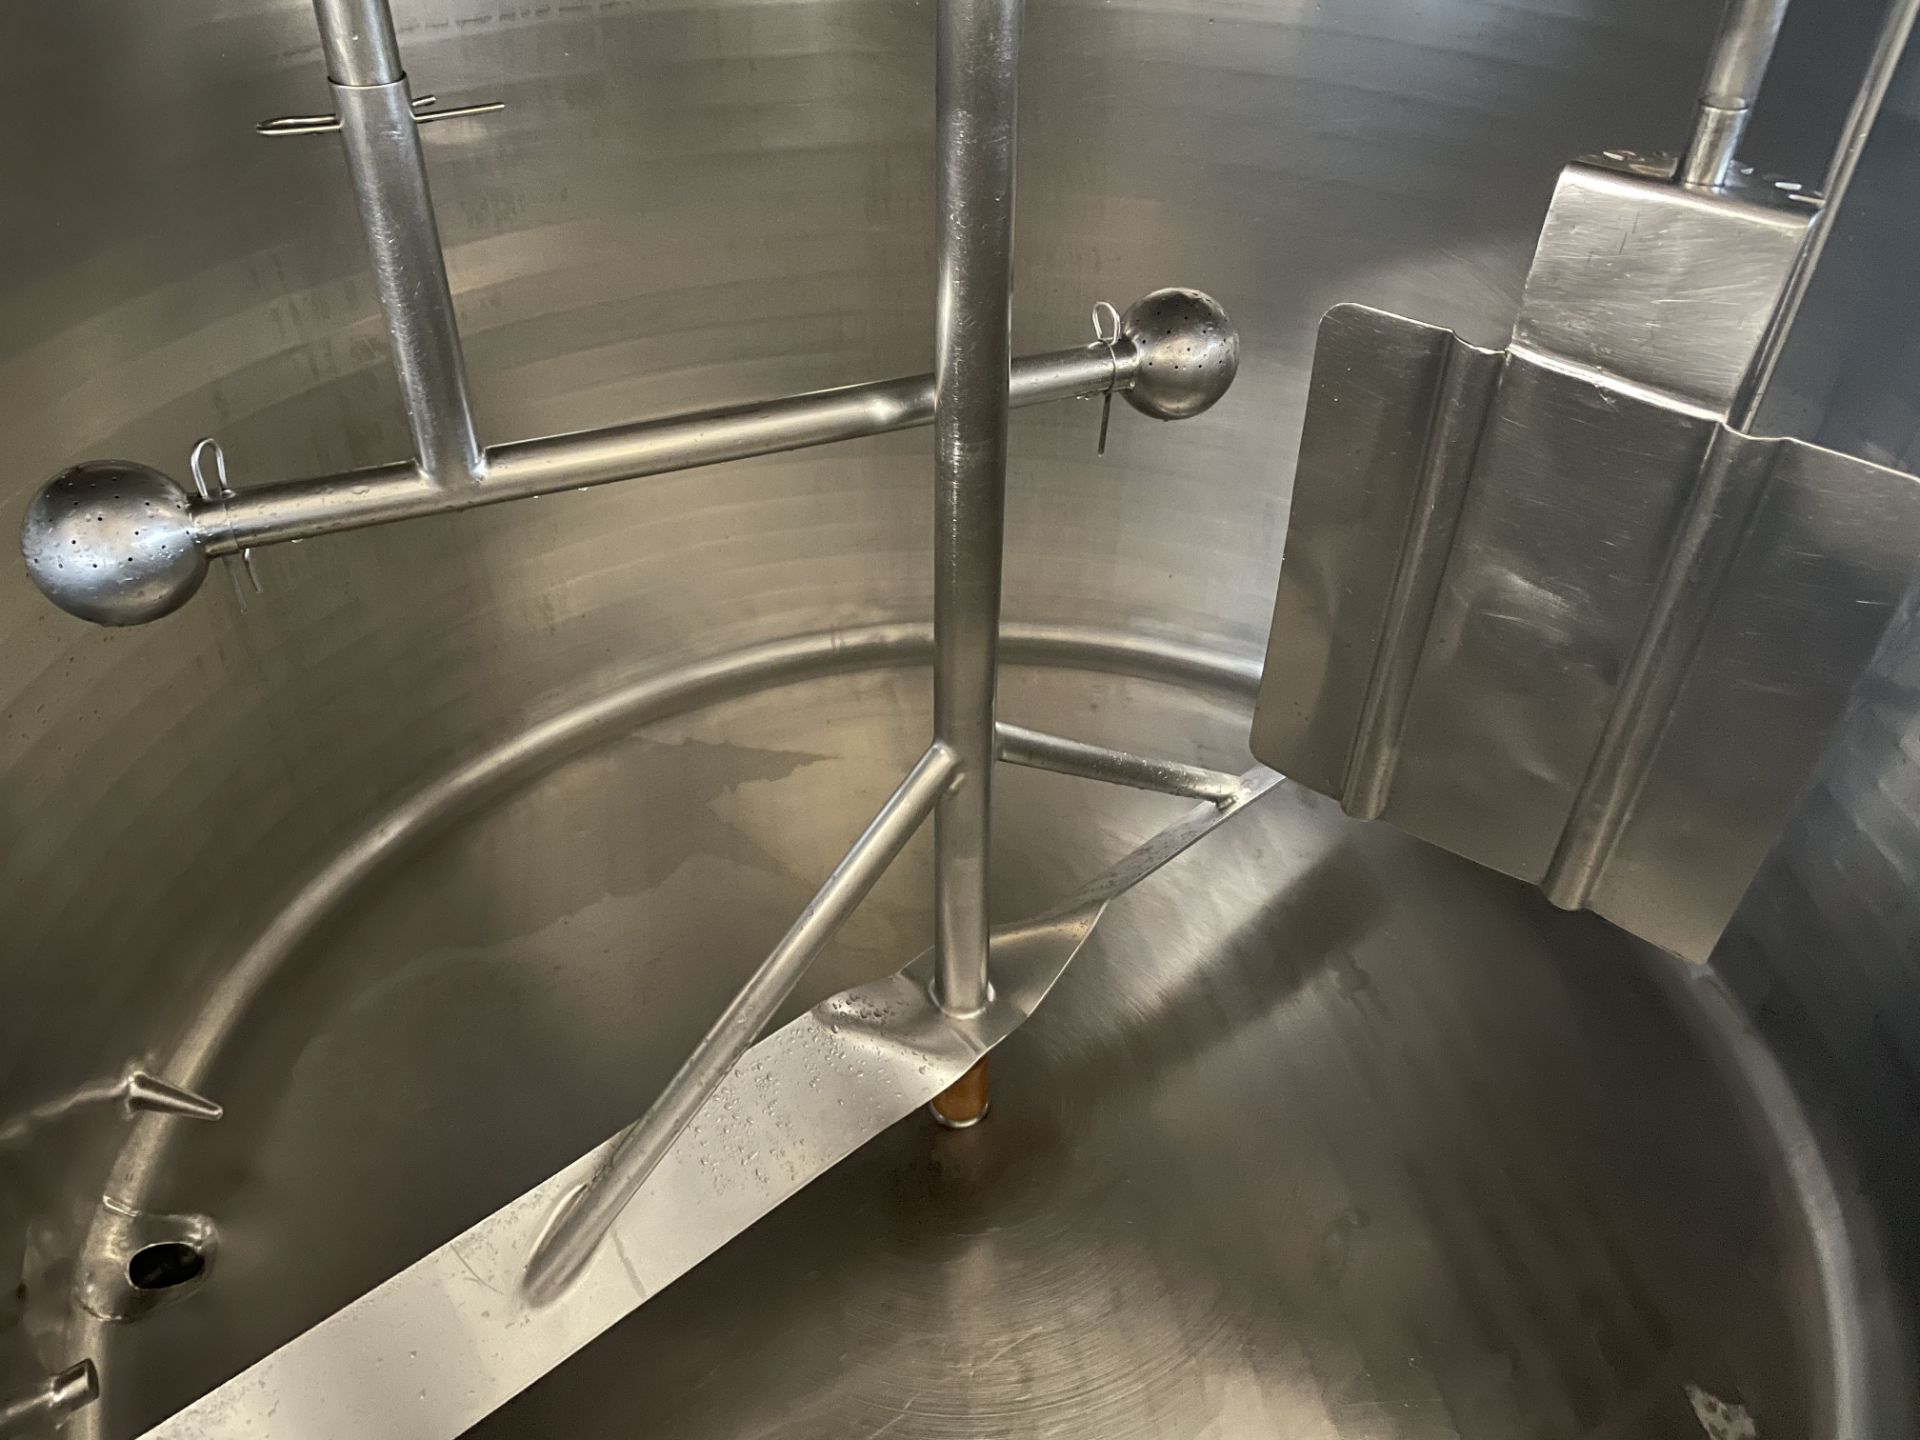 500 Gallon Dual Hinged-Lid Jacketed S/S Vat Pasteurizer (Vat # 7), with Vertical Agitation, S/S Leak - Image 7 of 7